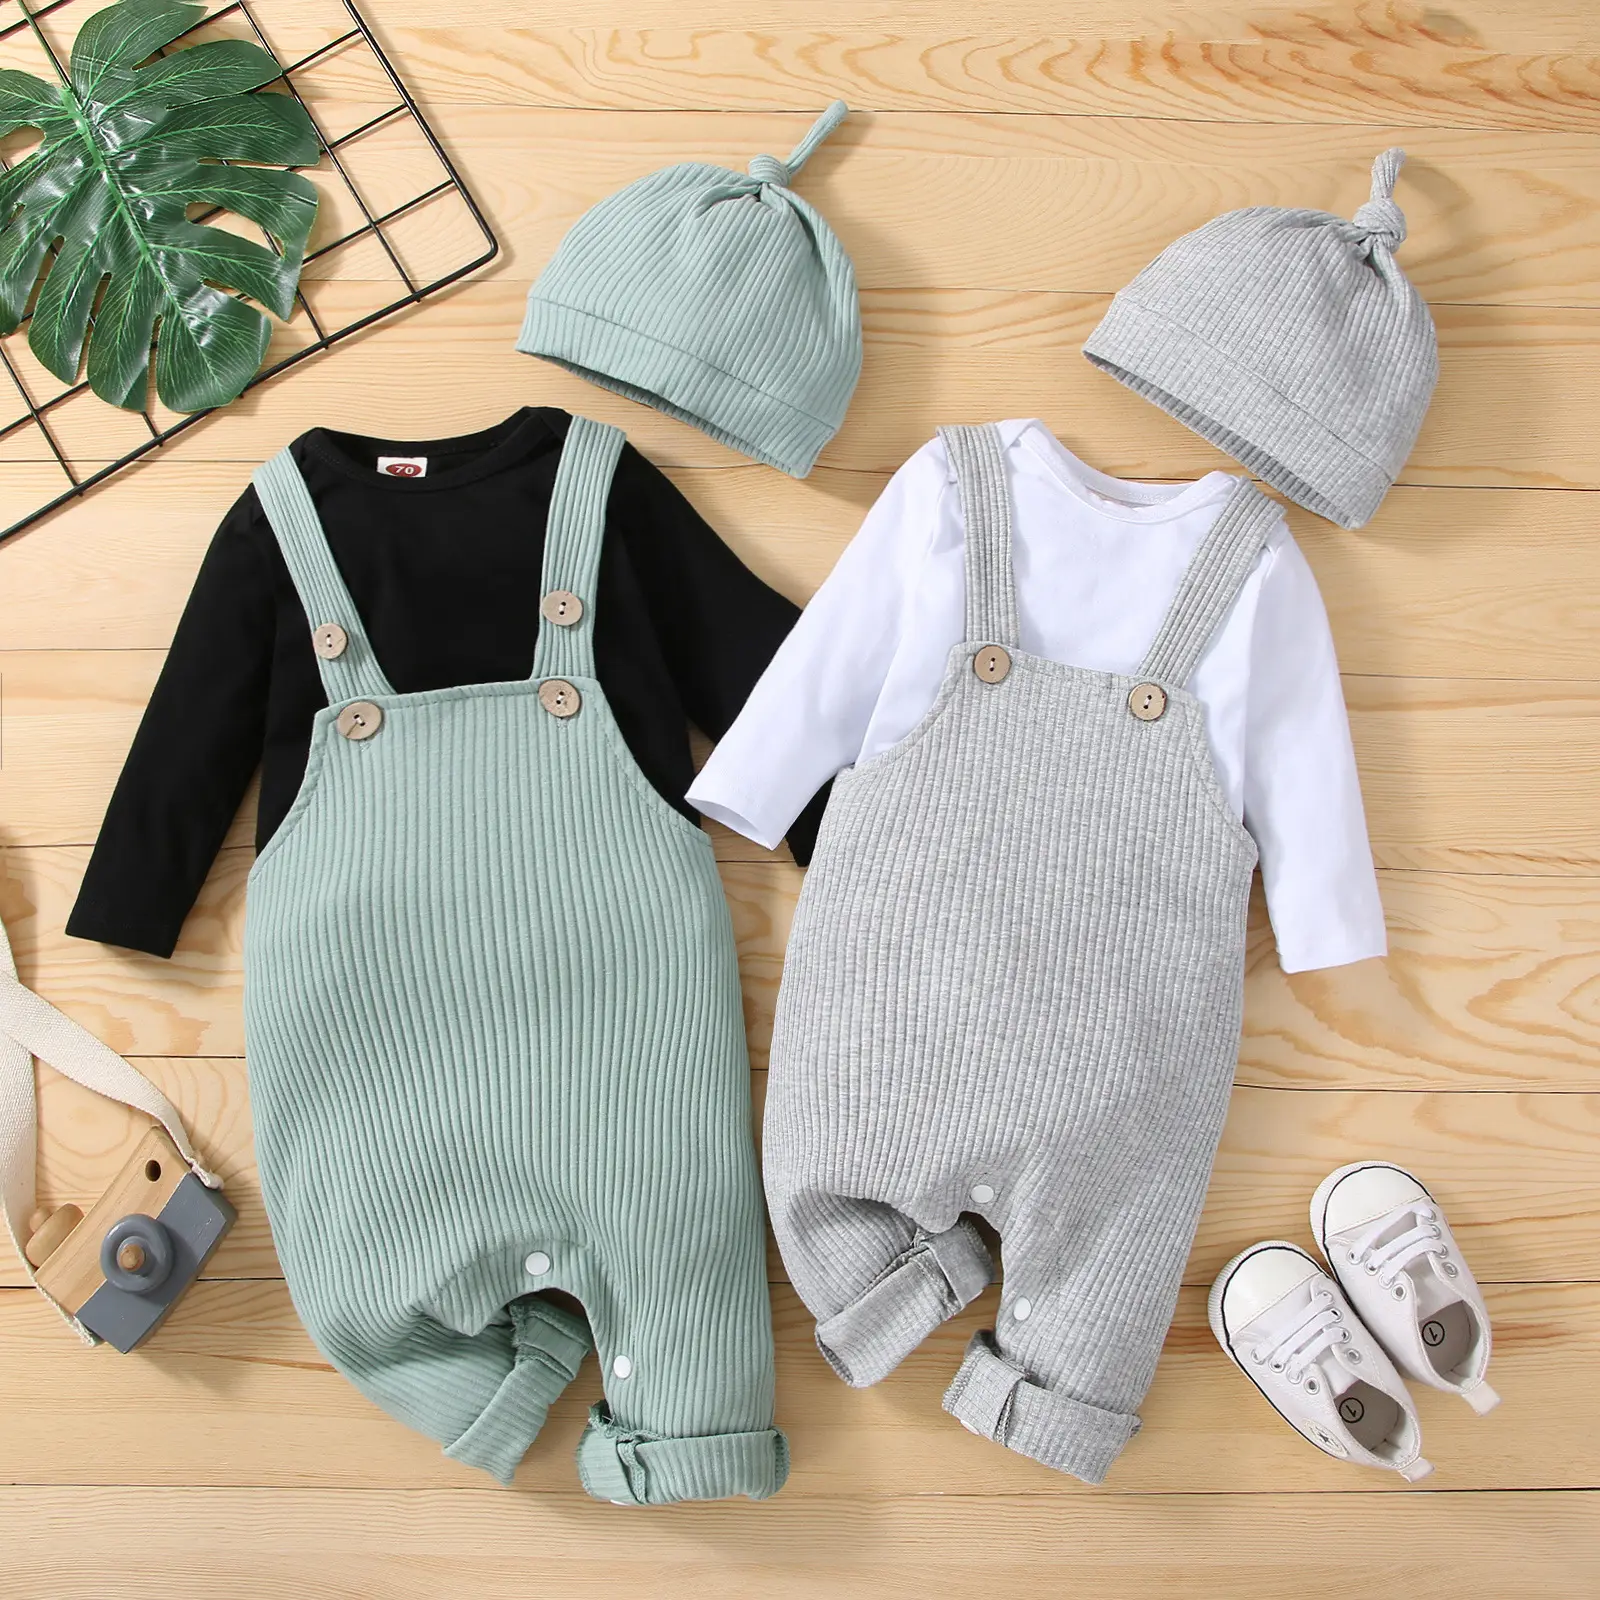 2172 New Baby Boys 3 Pcs Clothing Set Long Sleeve Solid Romper + Knitting Rib Bib Pants + Hat Outfits For Baby